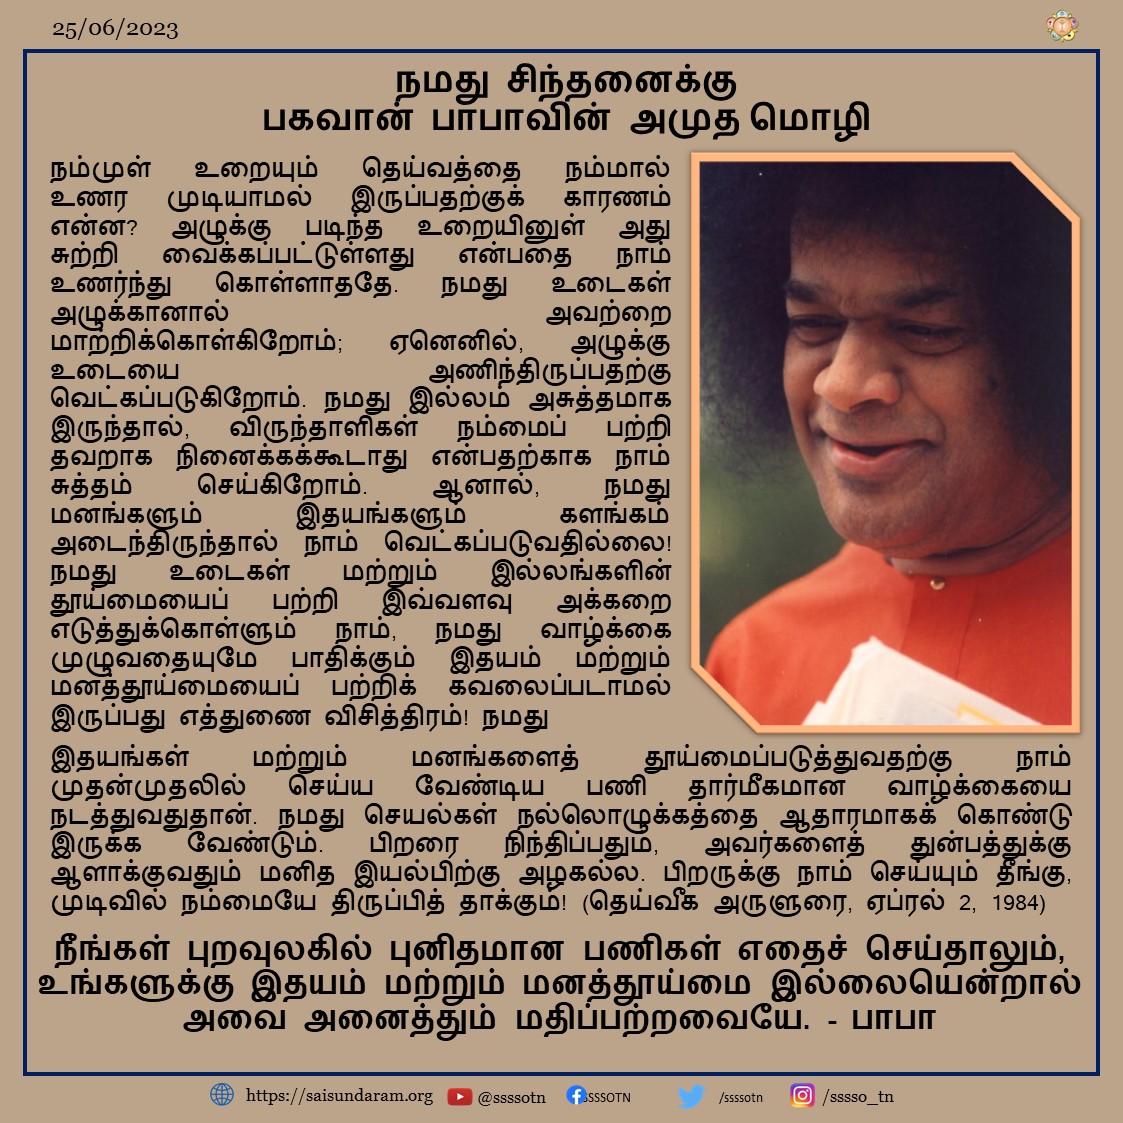 Thought For the Day | 25th June 2023  Our Most Beloved Bhagawan's Divine Message As Written in Prashanthi Nilayam, Puttaparthi. Divine Discourse - April 2, 1984  #SriSathyaSai #SriSathyaSaibaba #SriSathyaSai #ThoughtforTheDay #Divinemessage